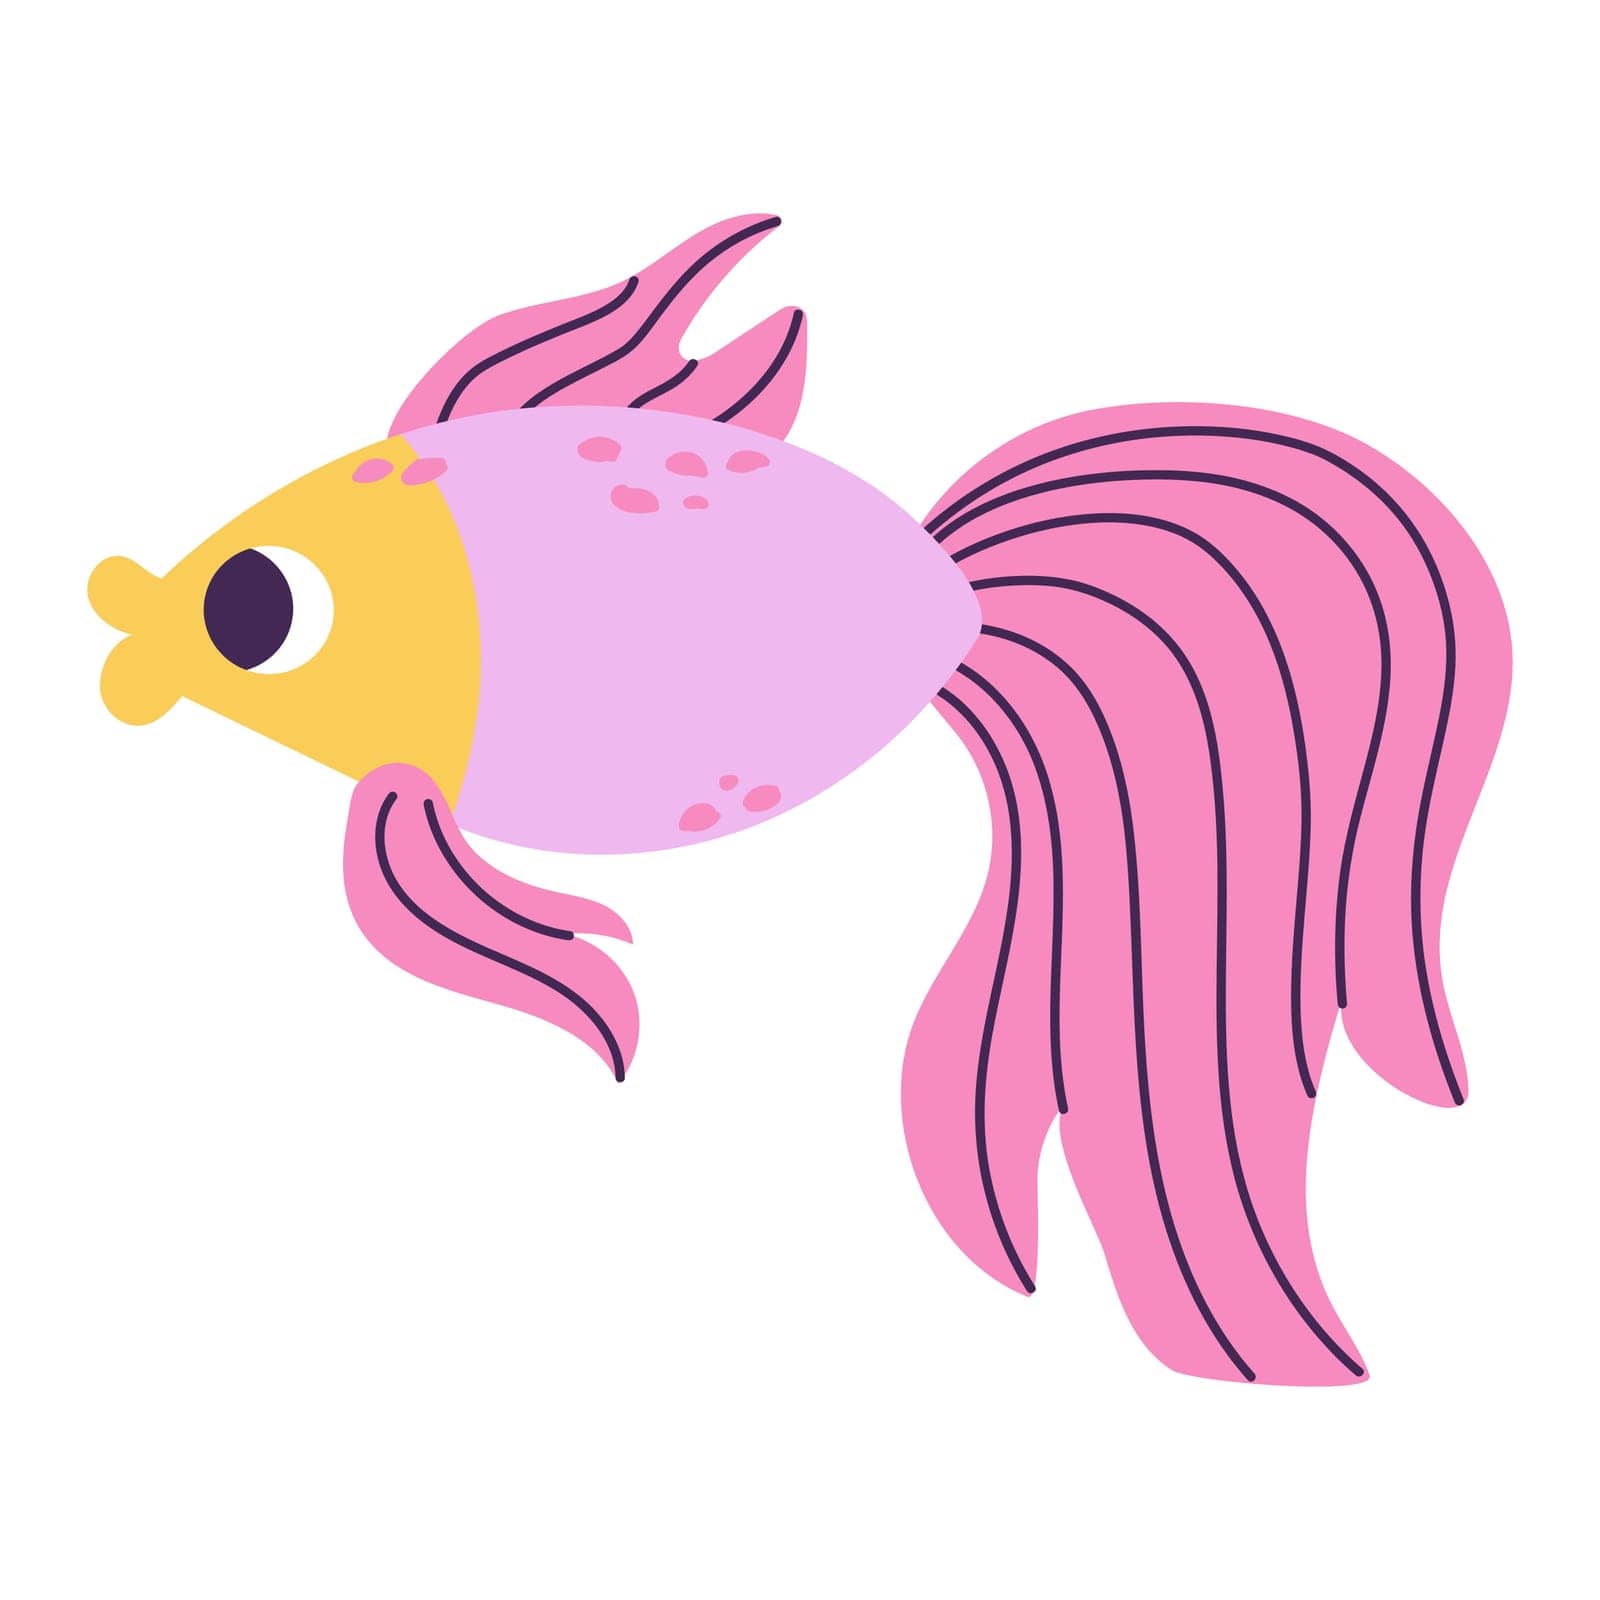 Isolated cartoon marine goldfish with spots in hand drawn flat style on white background.